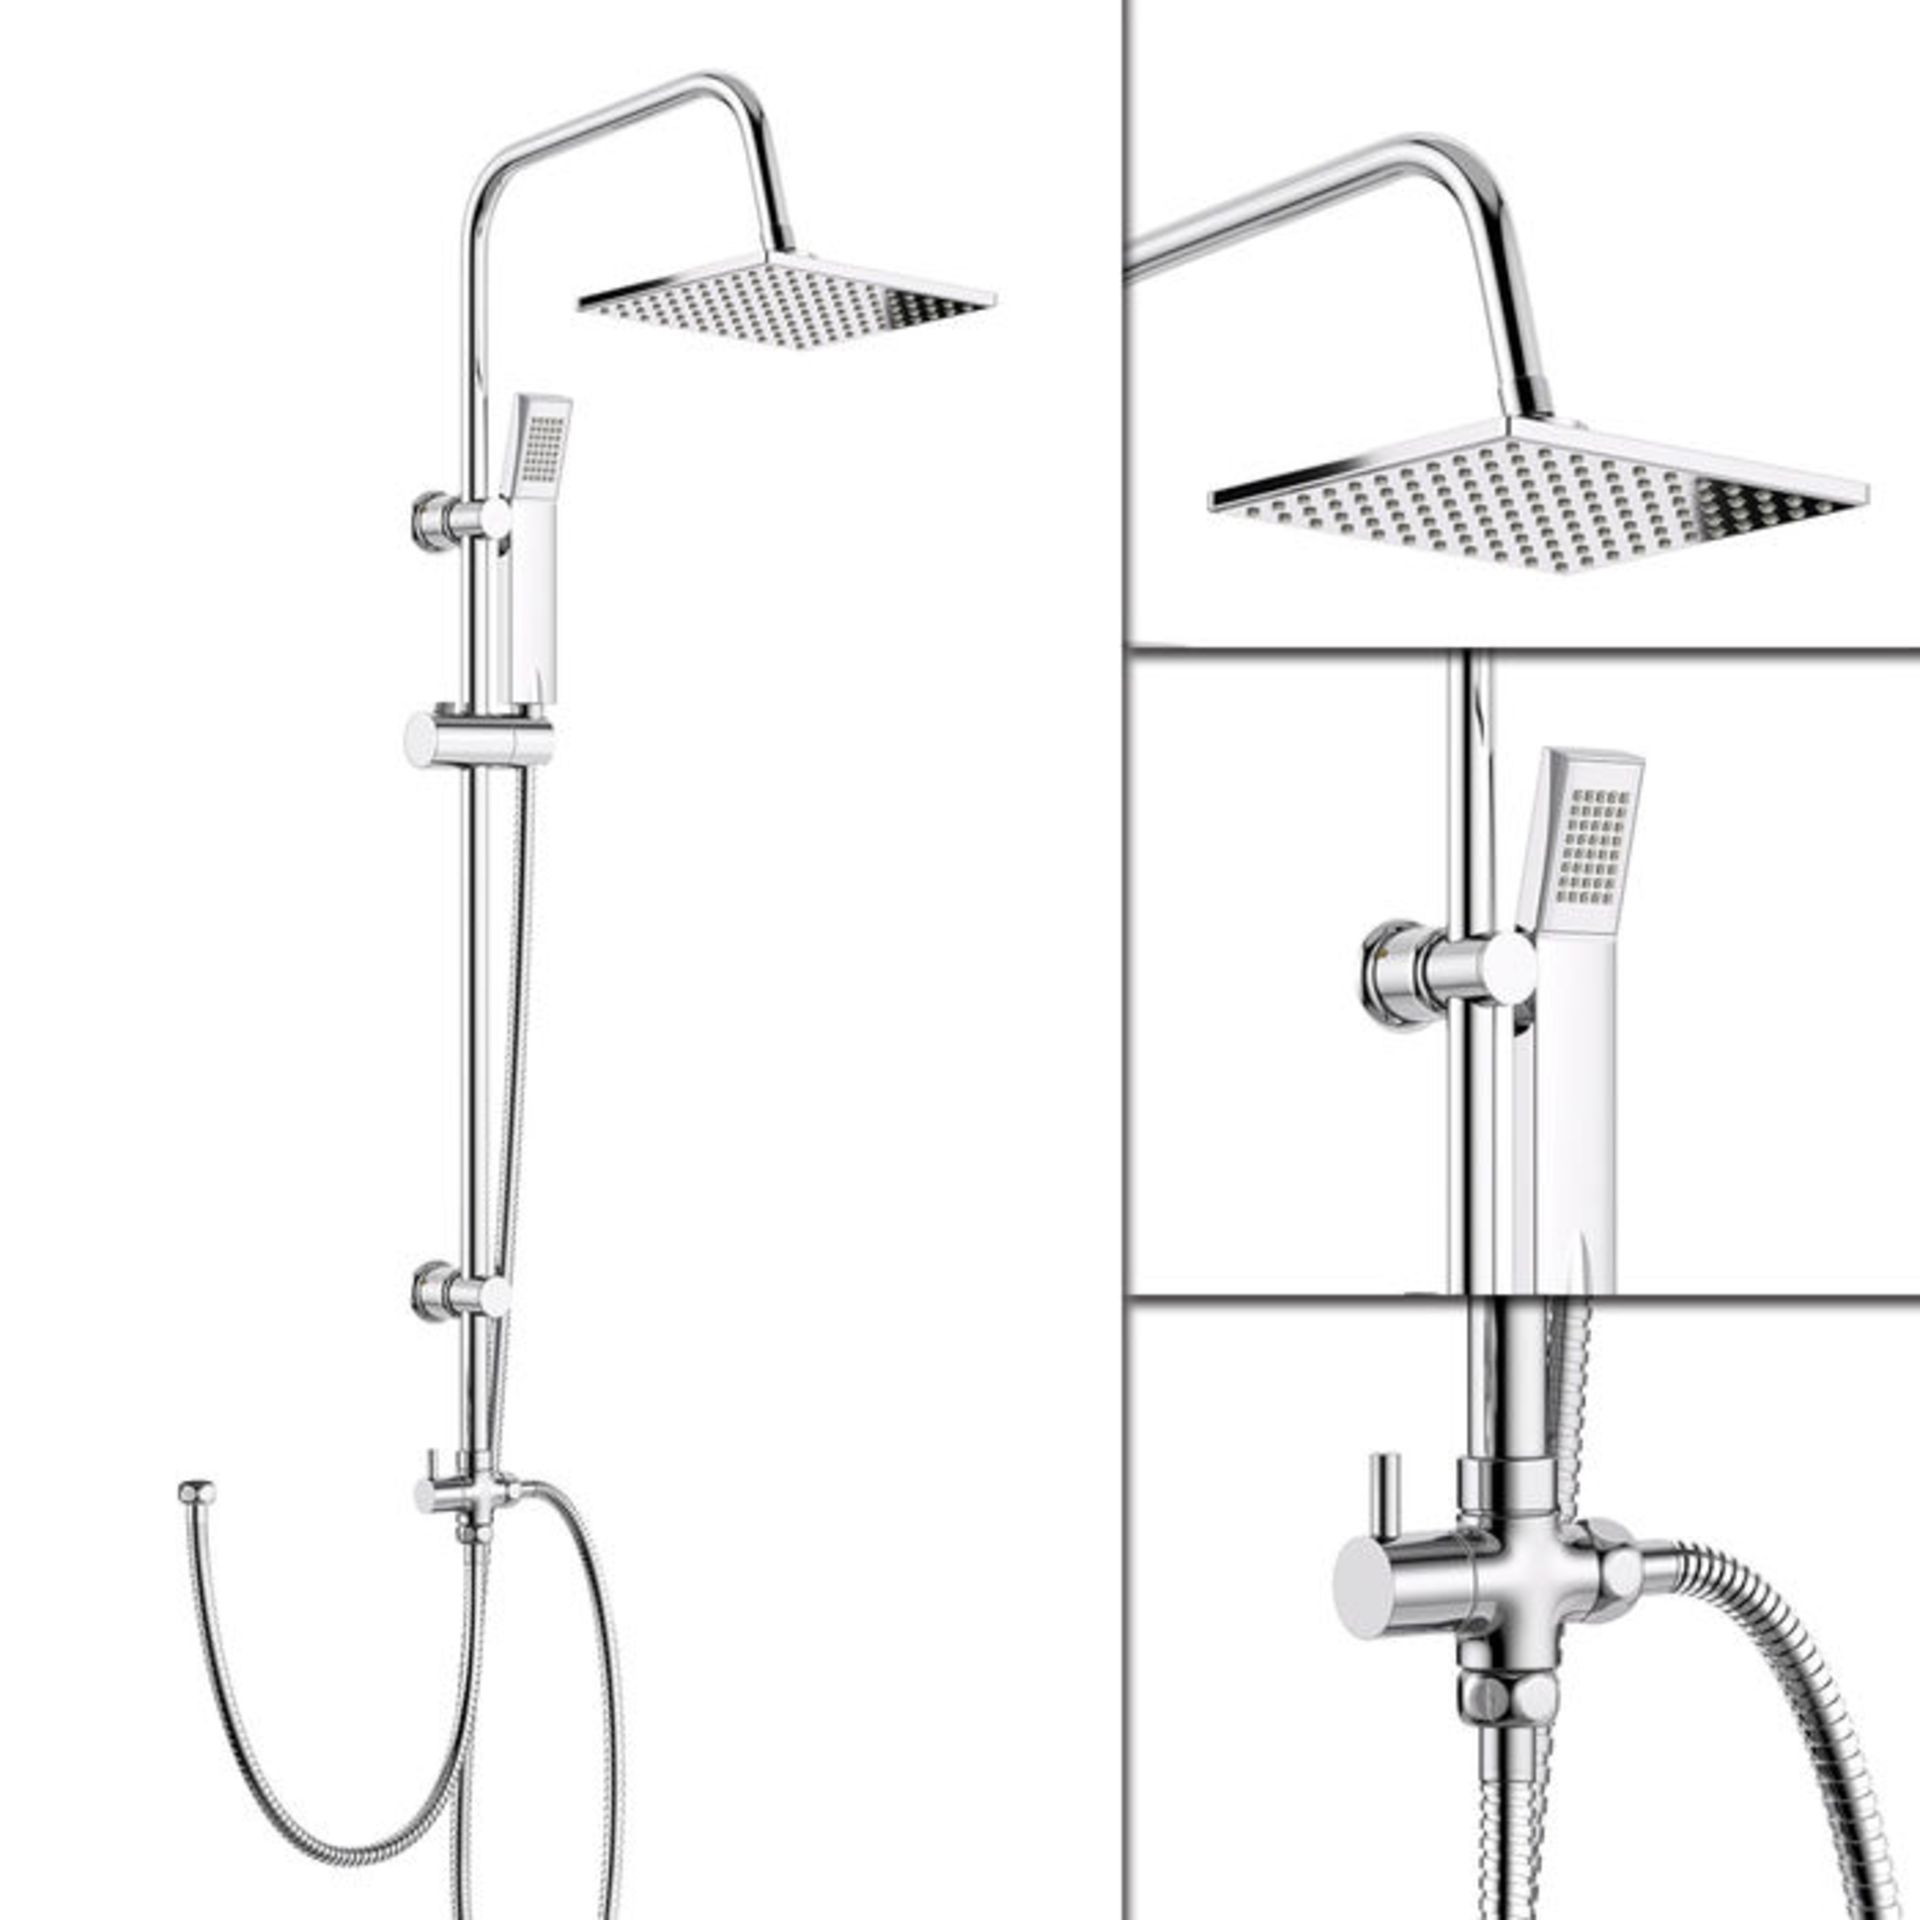 (P160) 200mm Square Head, Riser Rail Handheld Kit. Quality stainless steel shower head with Easy - Image 3 of 4